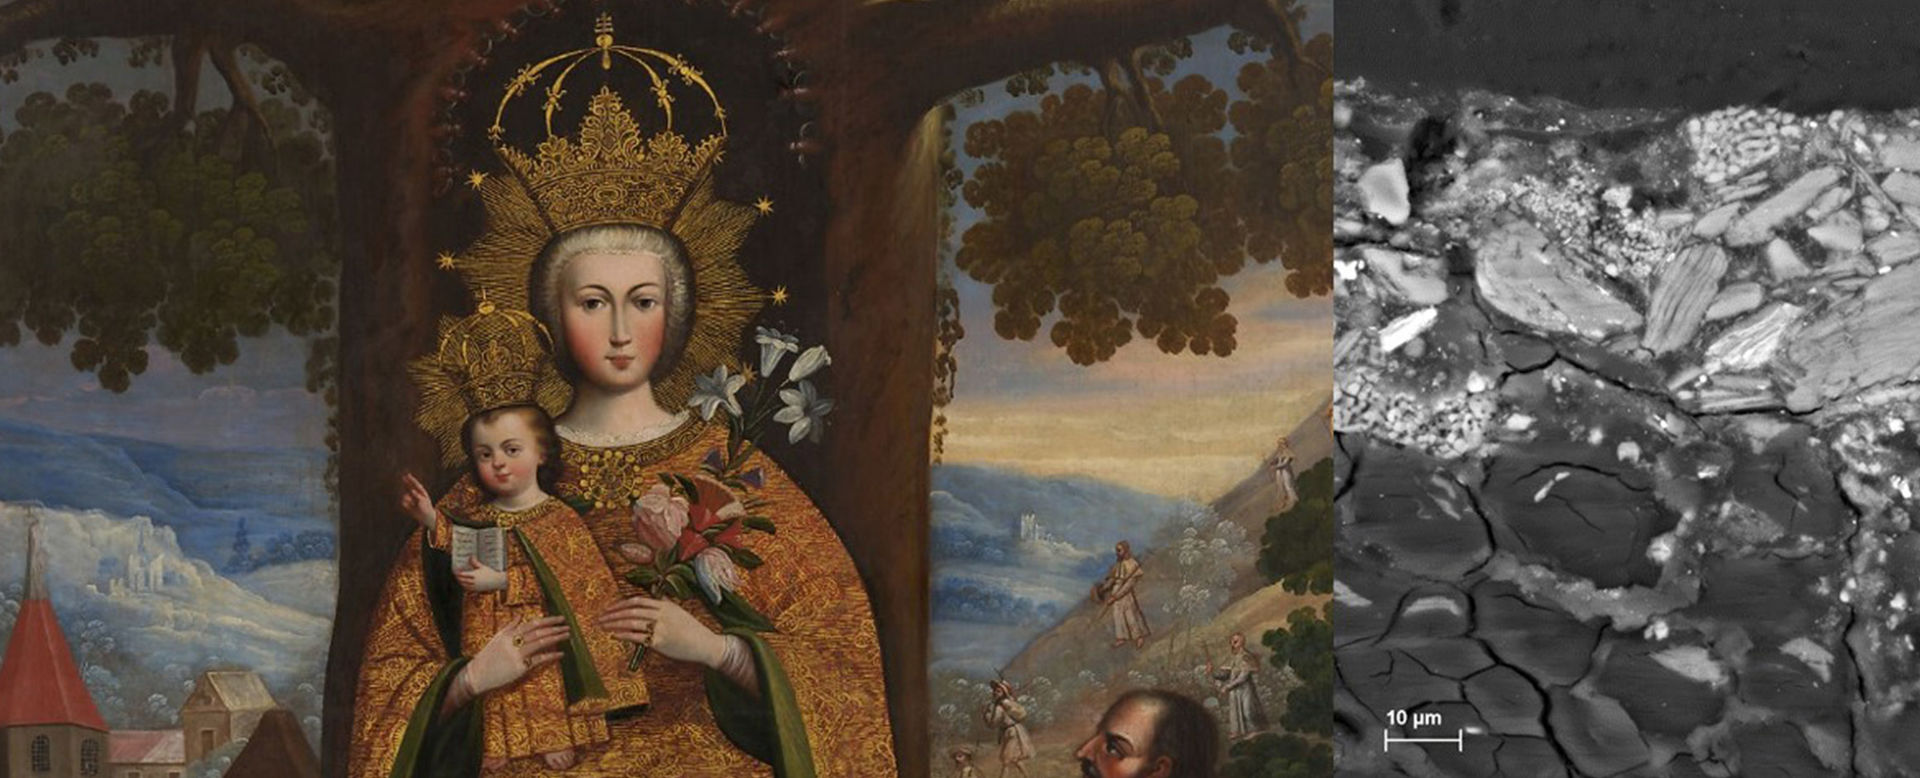 Two images side by side. At left, a close-up of a large 18th-century Cuzco School painting depicting the Virgin of Valvanera. She holds the Holy Child with her right hand and a bouquet of flowers in her left. At right, a magnified paint sample in black and white shows the different pigments and particles in the paint and ground layers of the artwork. A 10-microns scale bar denotes the magnification in the corner.